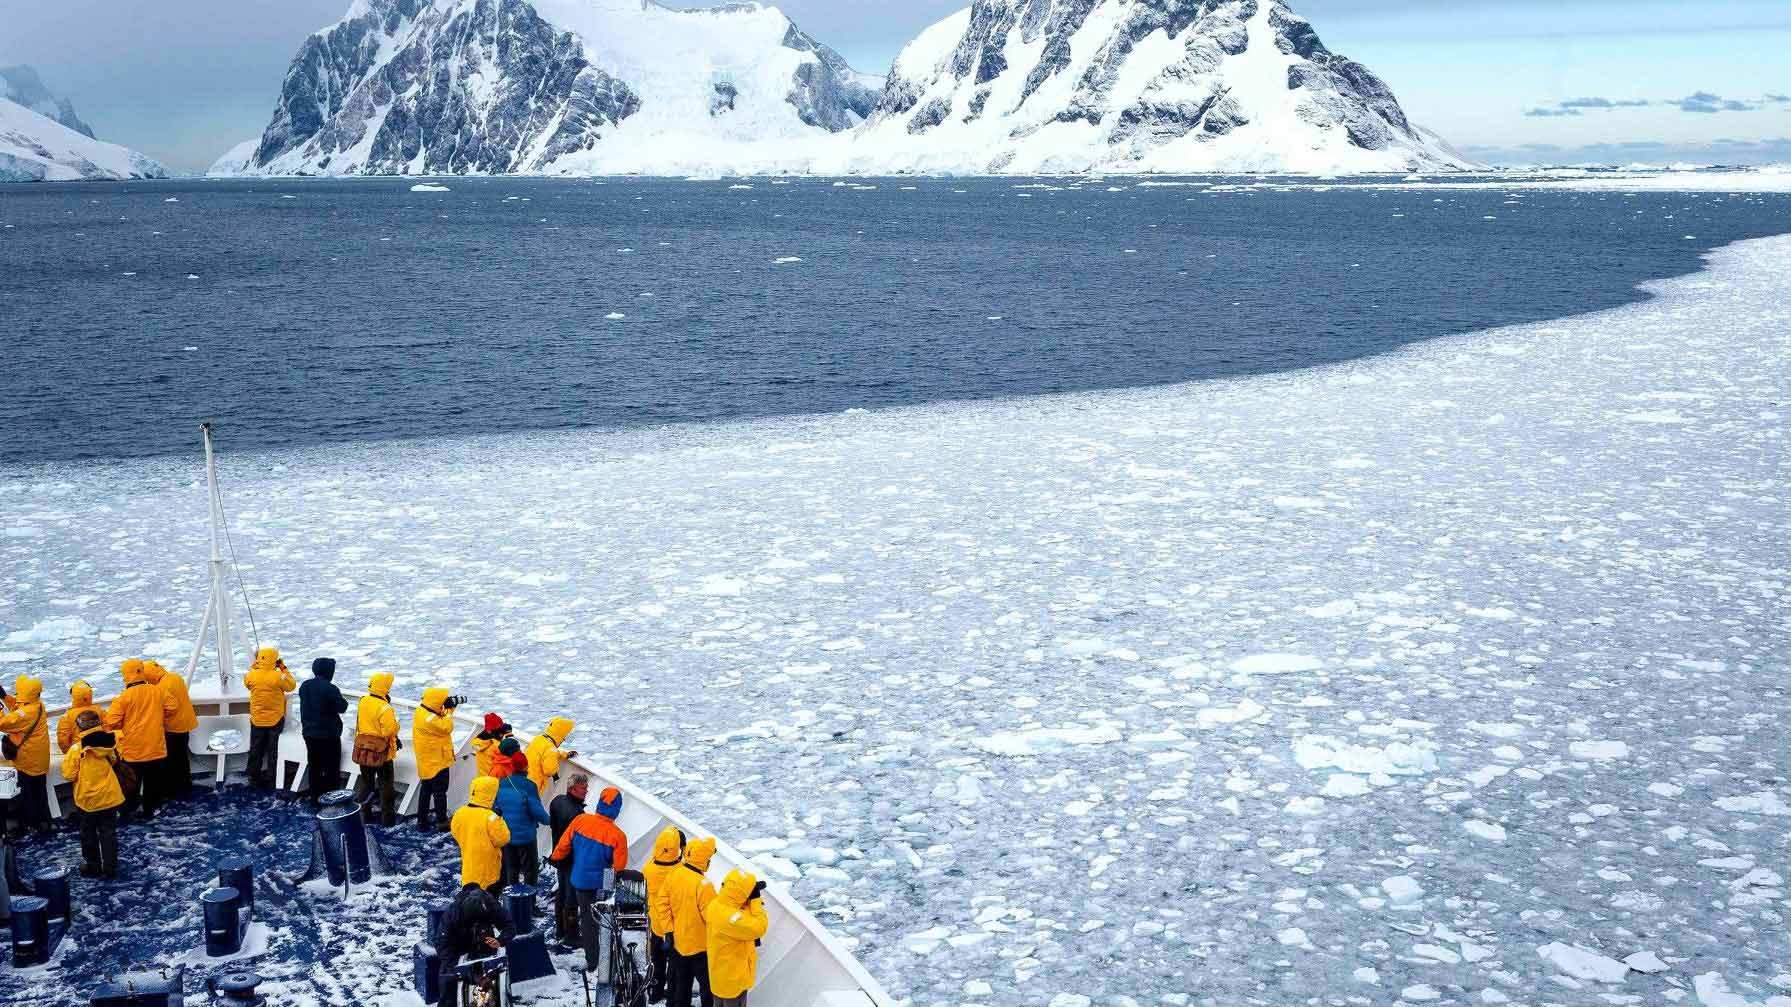 View of Icebergs in Antarctica with people watching the view from cruise ship.